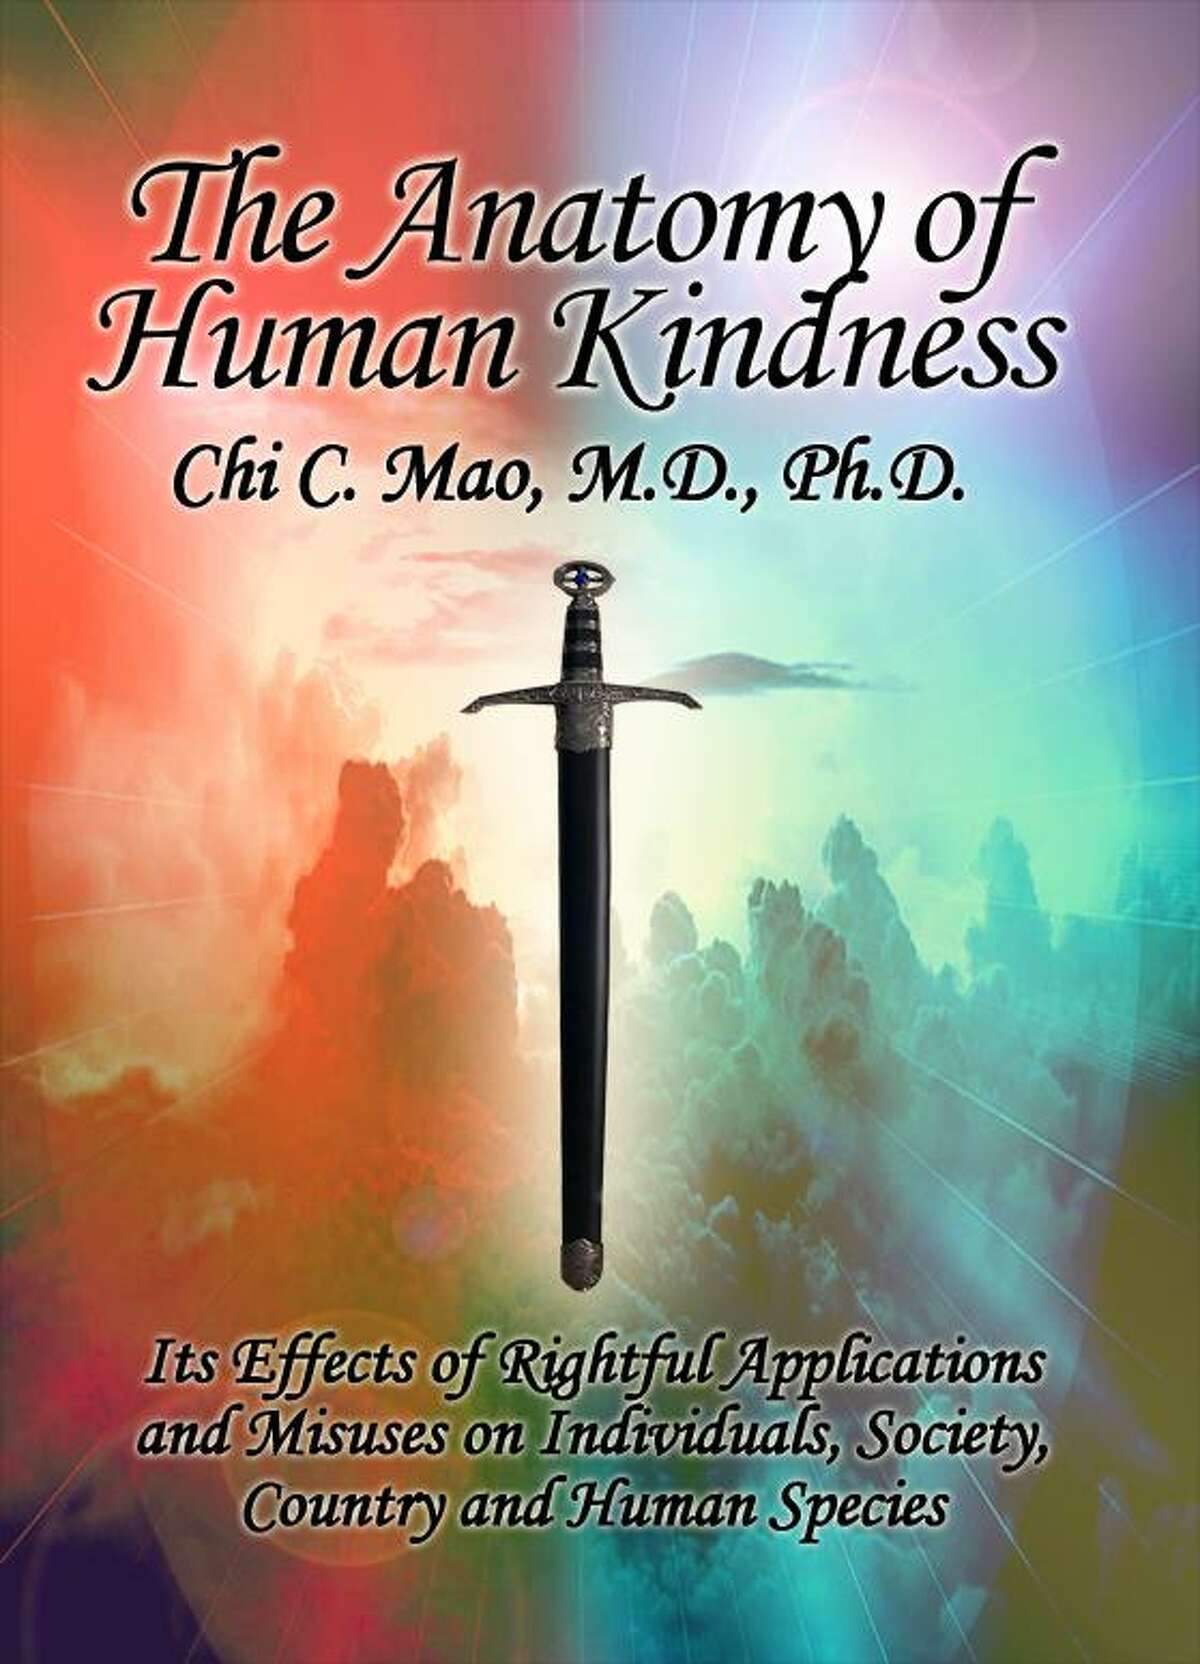 Bellaire author Dr. Chi C. Mao has released his latest book, The Anatomy of Human Kindness.